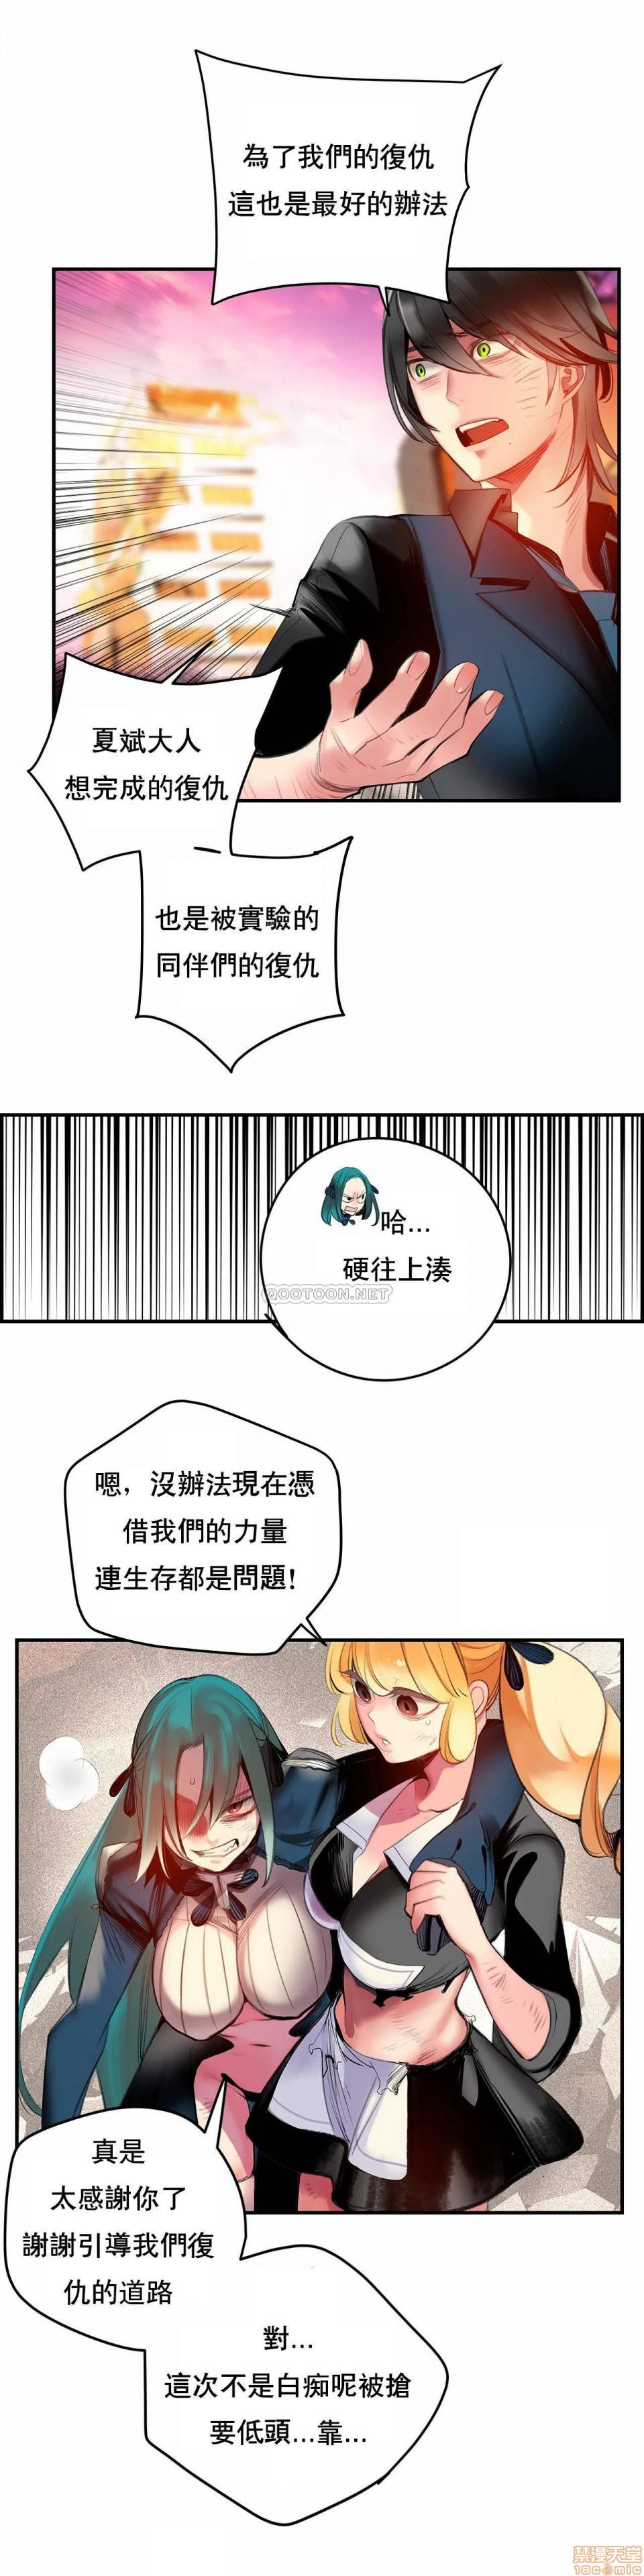 [Juder] Lilith`s Cord (第二季) Ch.77-93 end [Chinese] 141